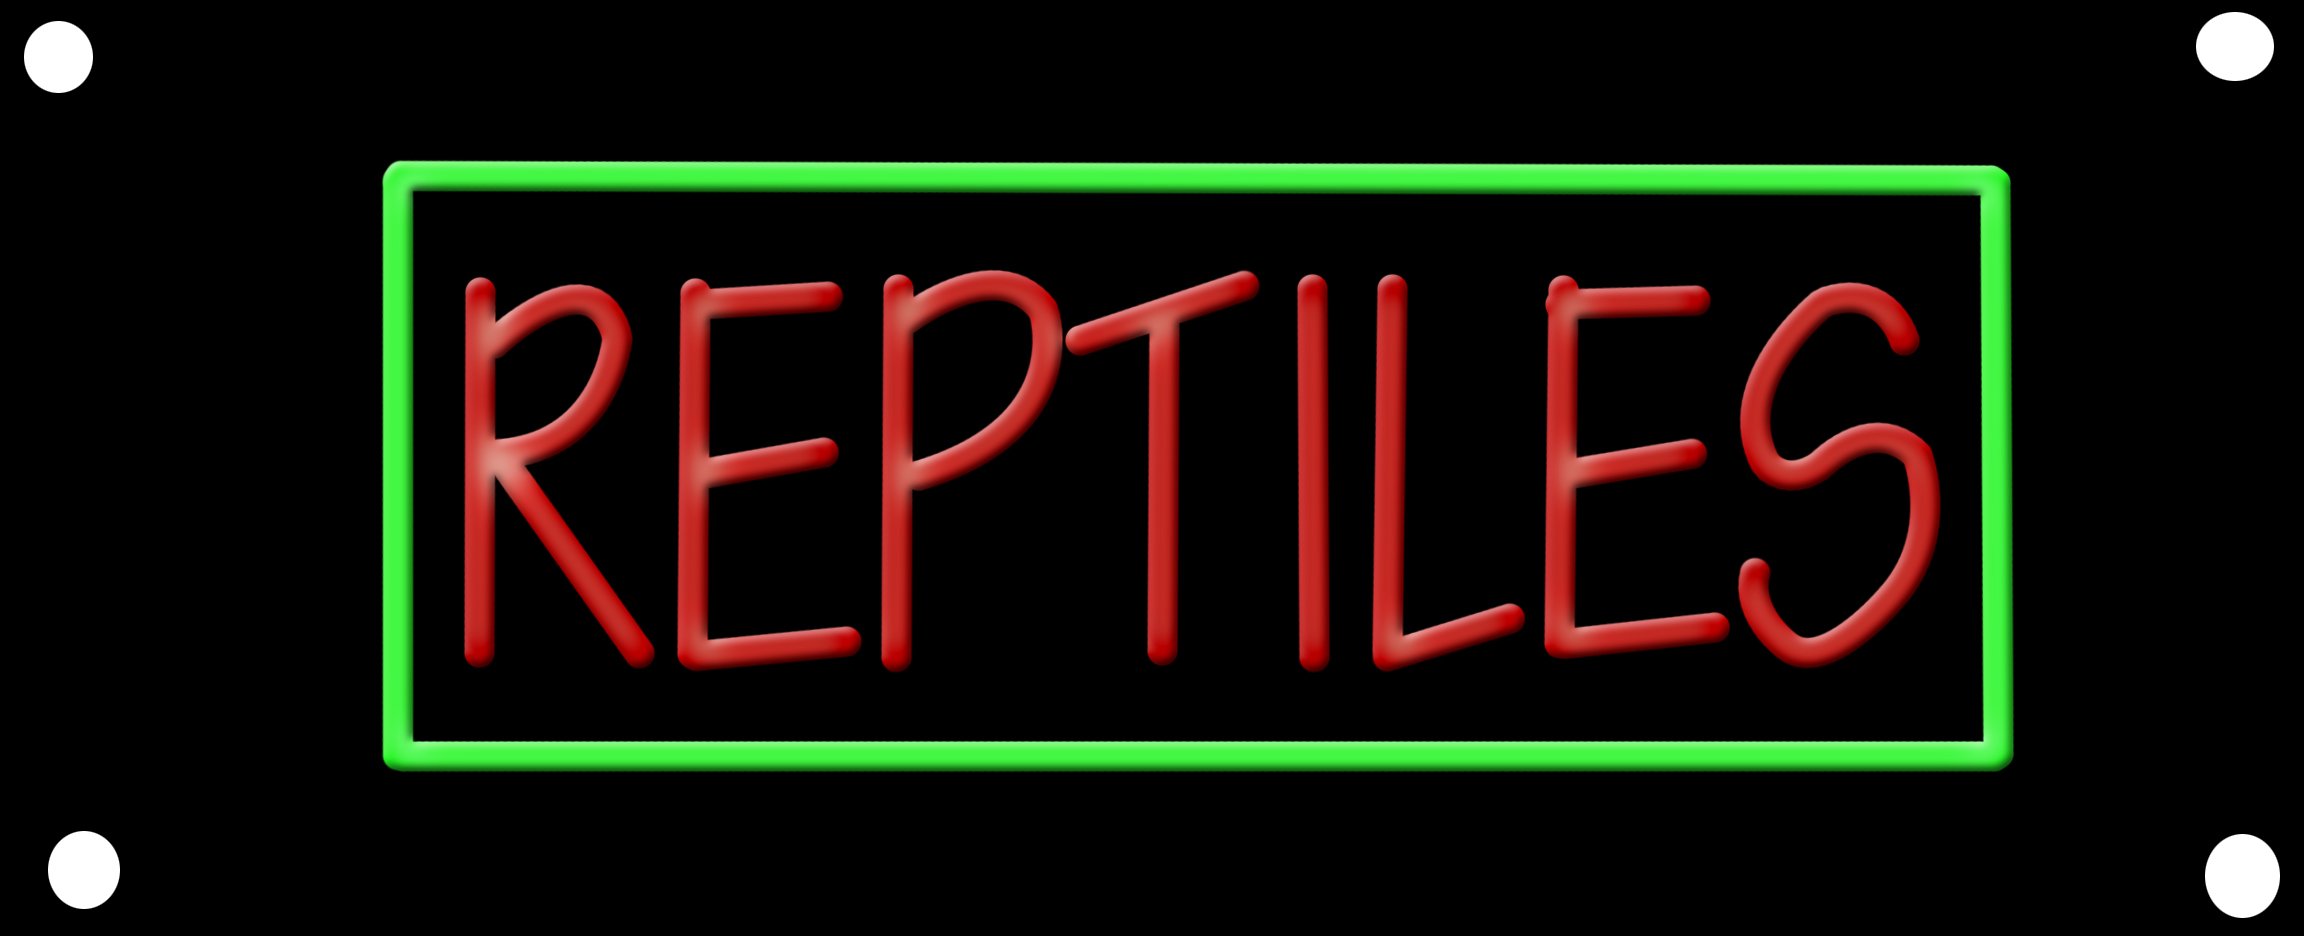 image of 11469 reptiles with green border led bulb sign